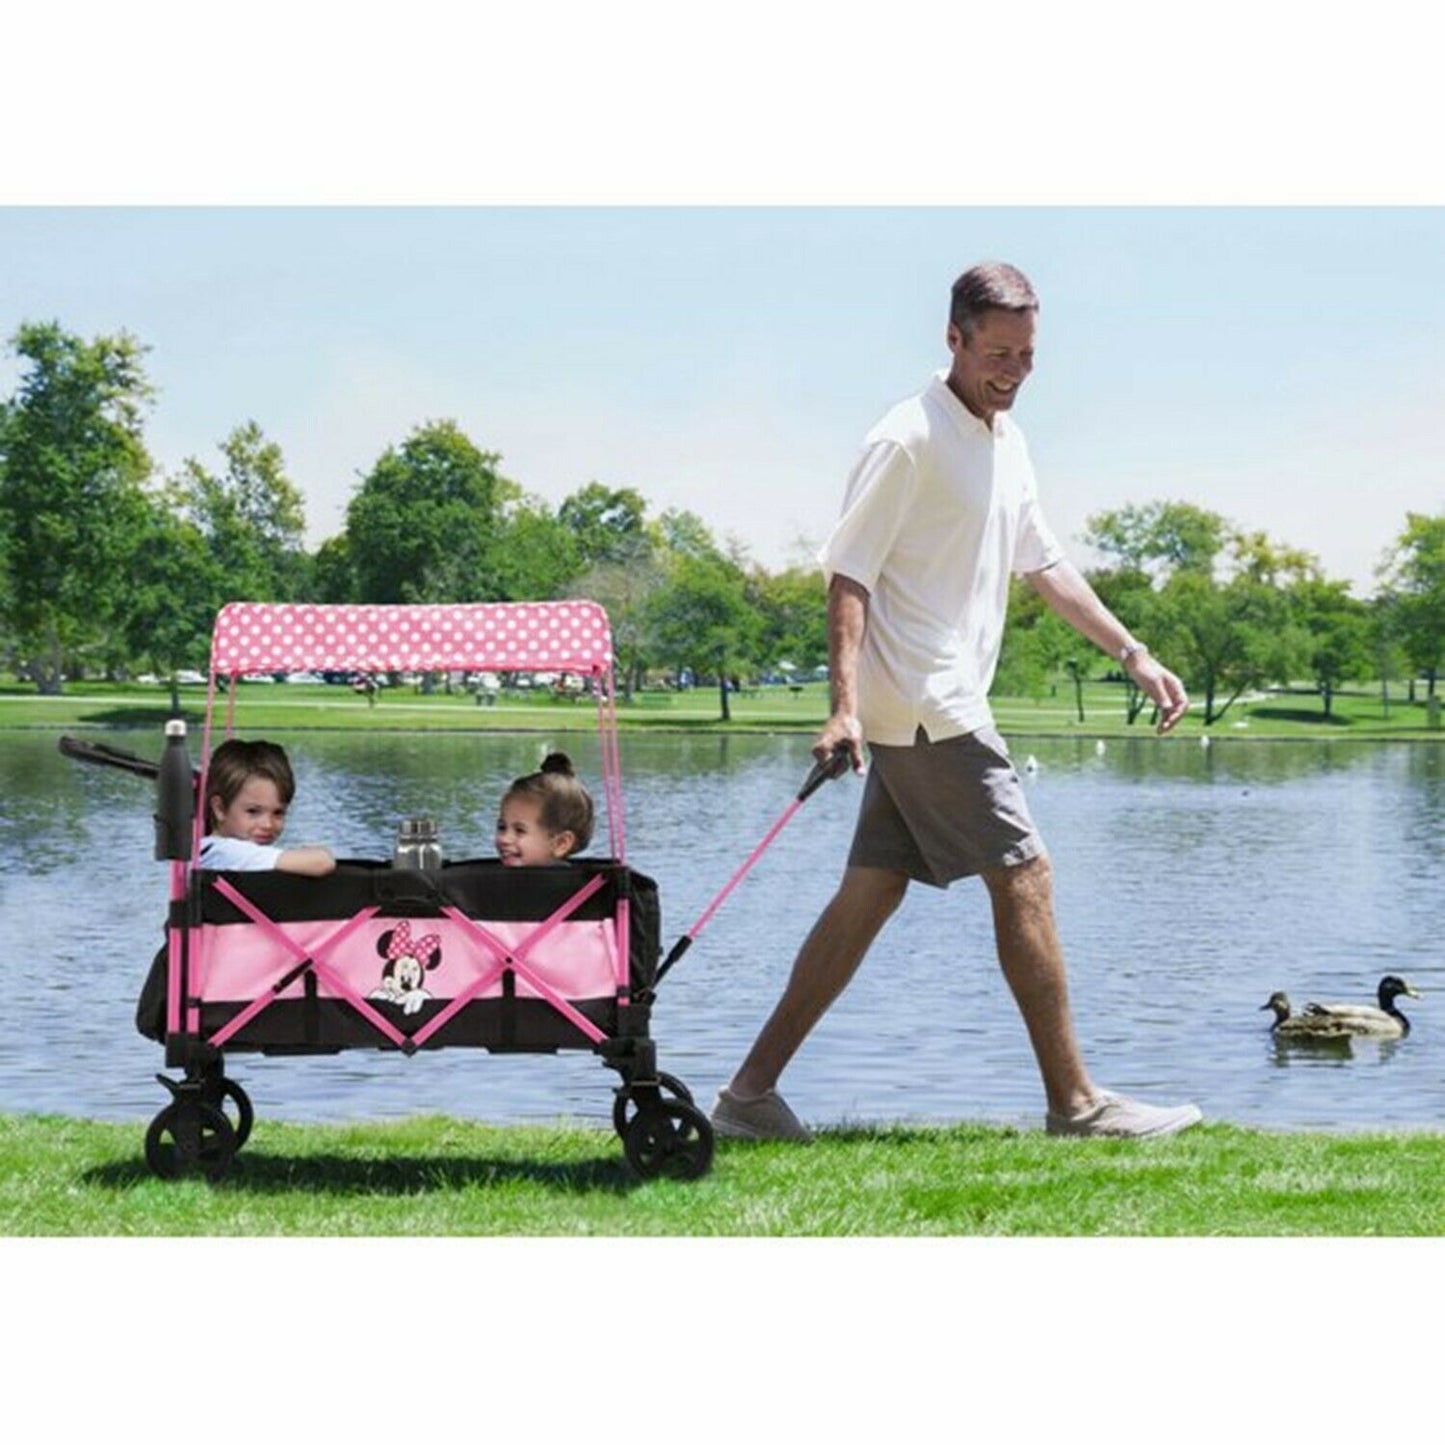 Disney Baby Stroller Wagon Pull-Along Minnie Mouse Kid's Toddler - Pink